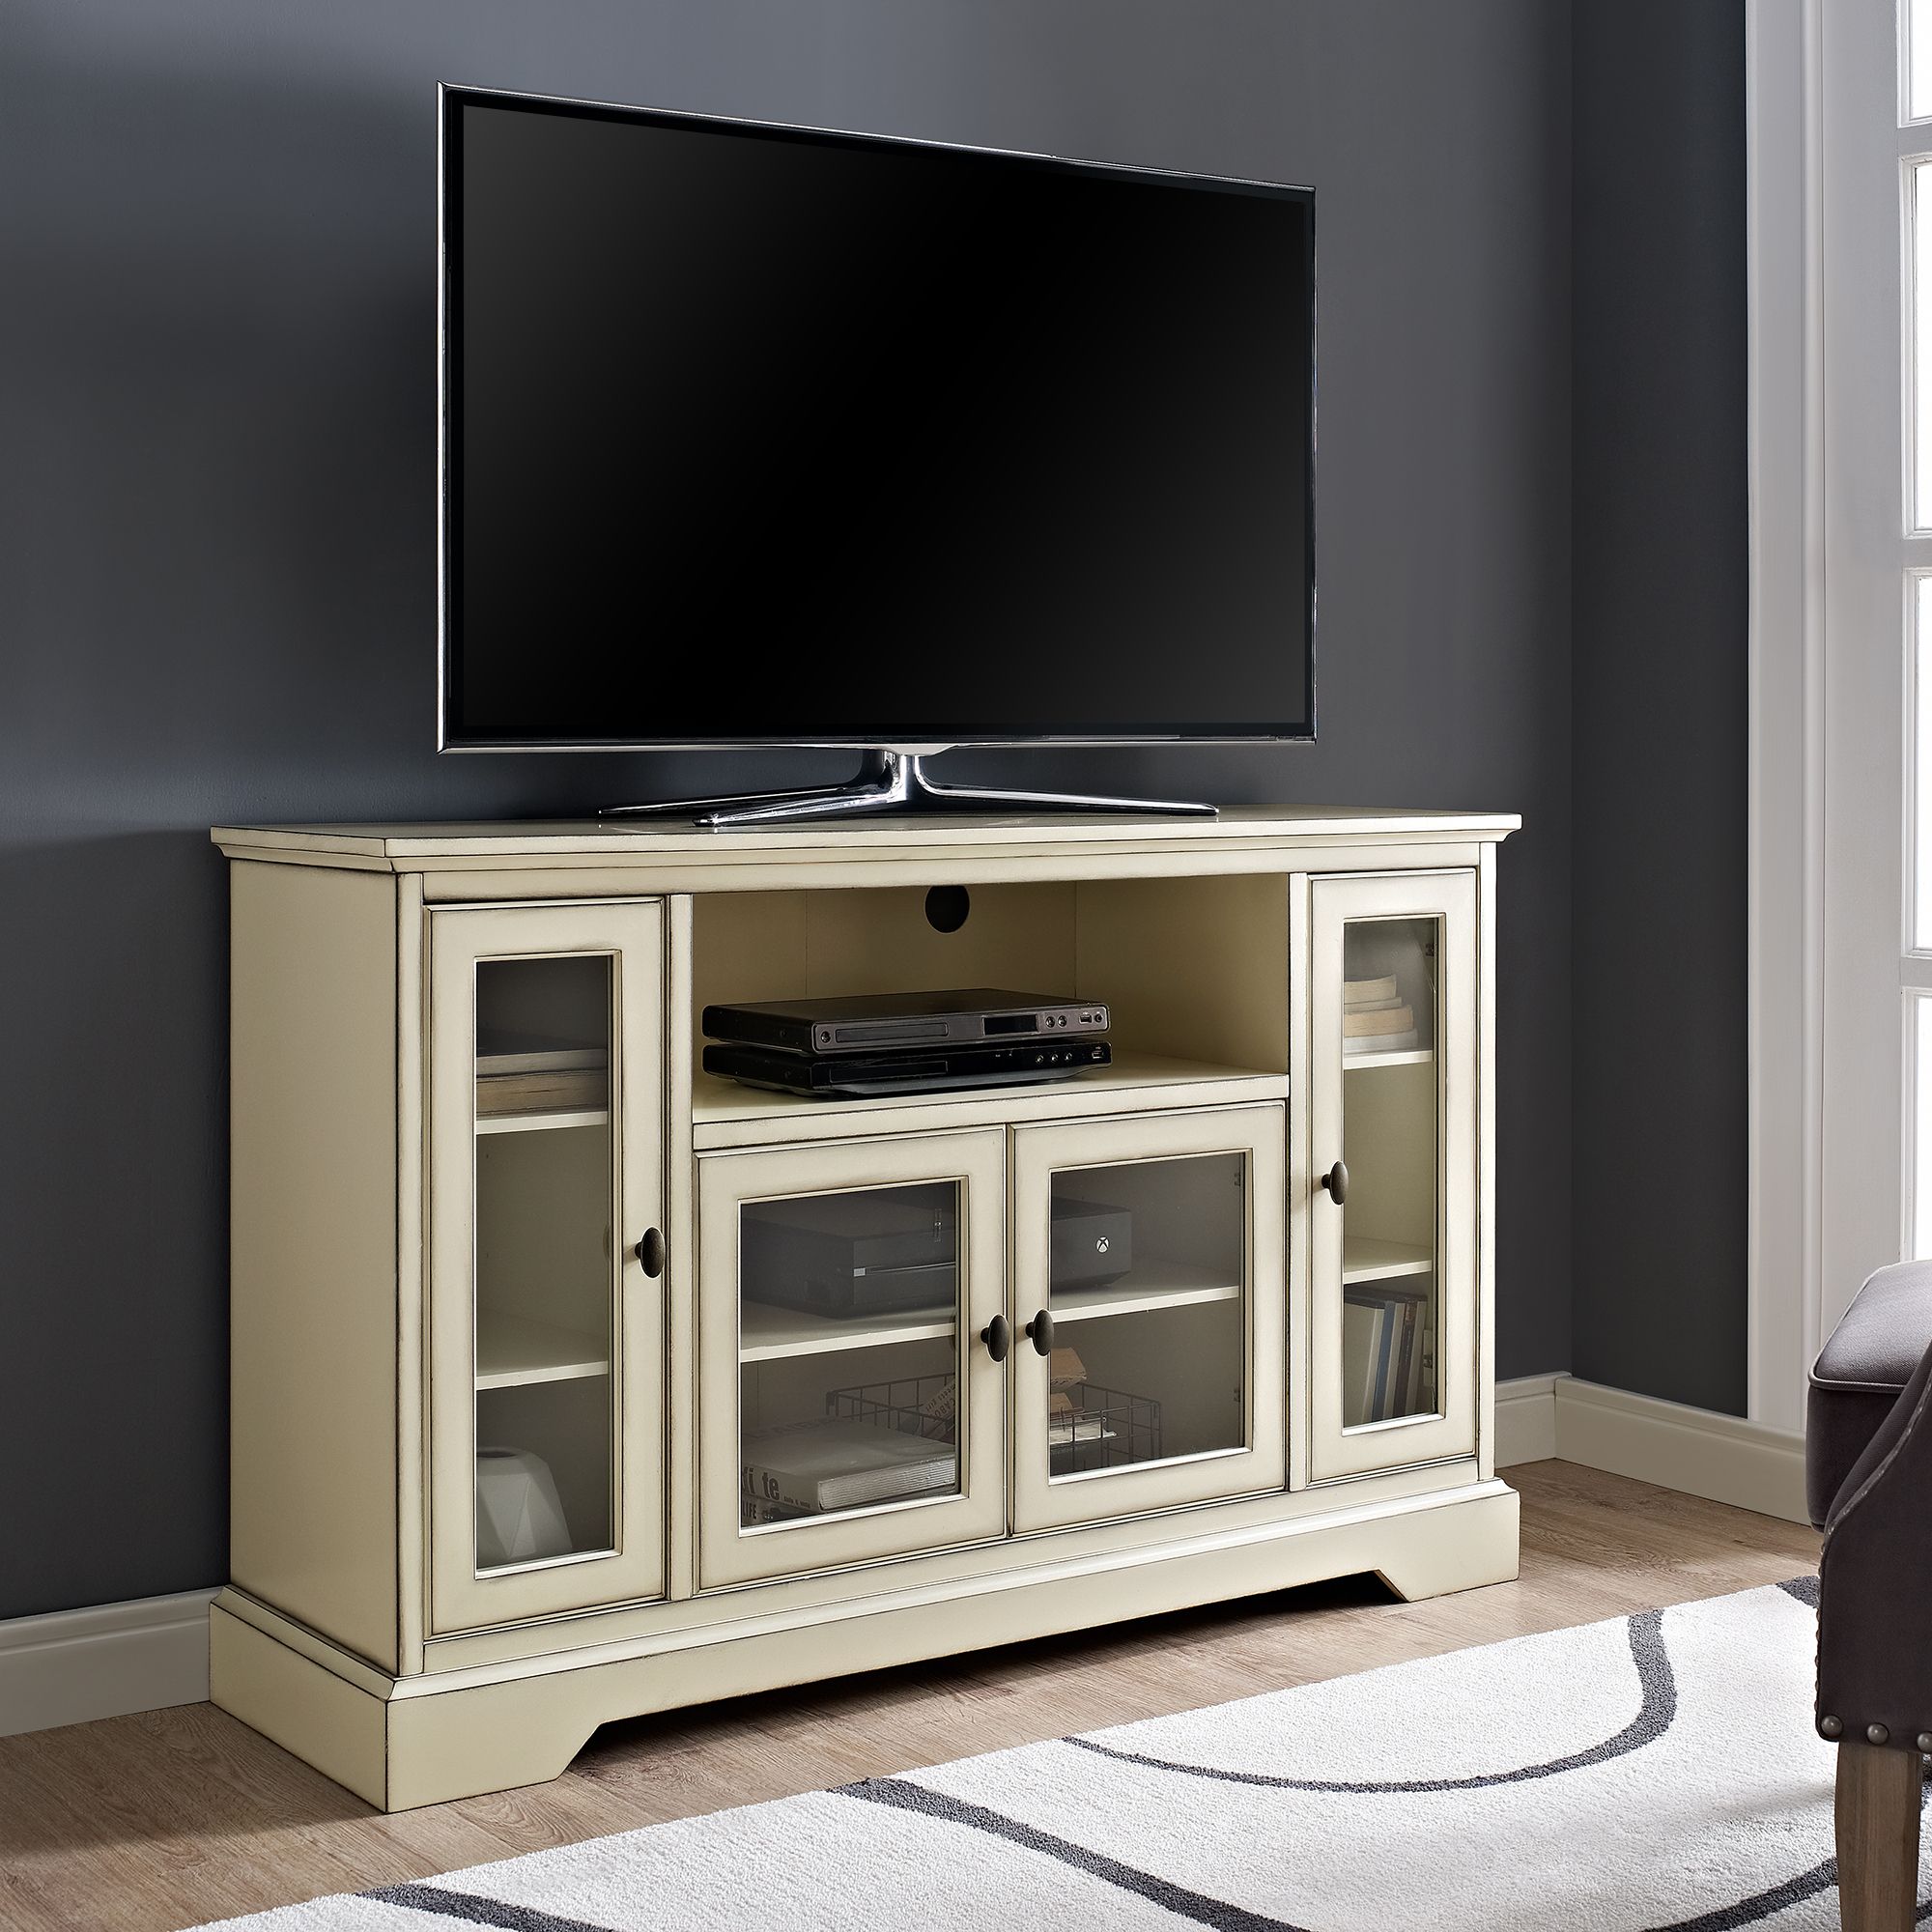 Manor Park Transitional Highboy Glass Door Antique Wood Tv Pertaining To White Wooden Tv Stands (View 3 of 15)